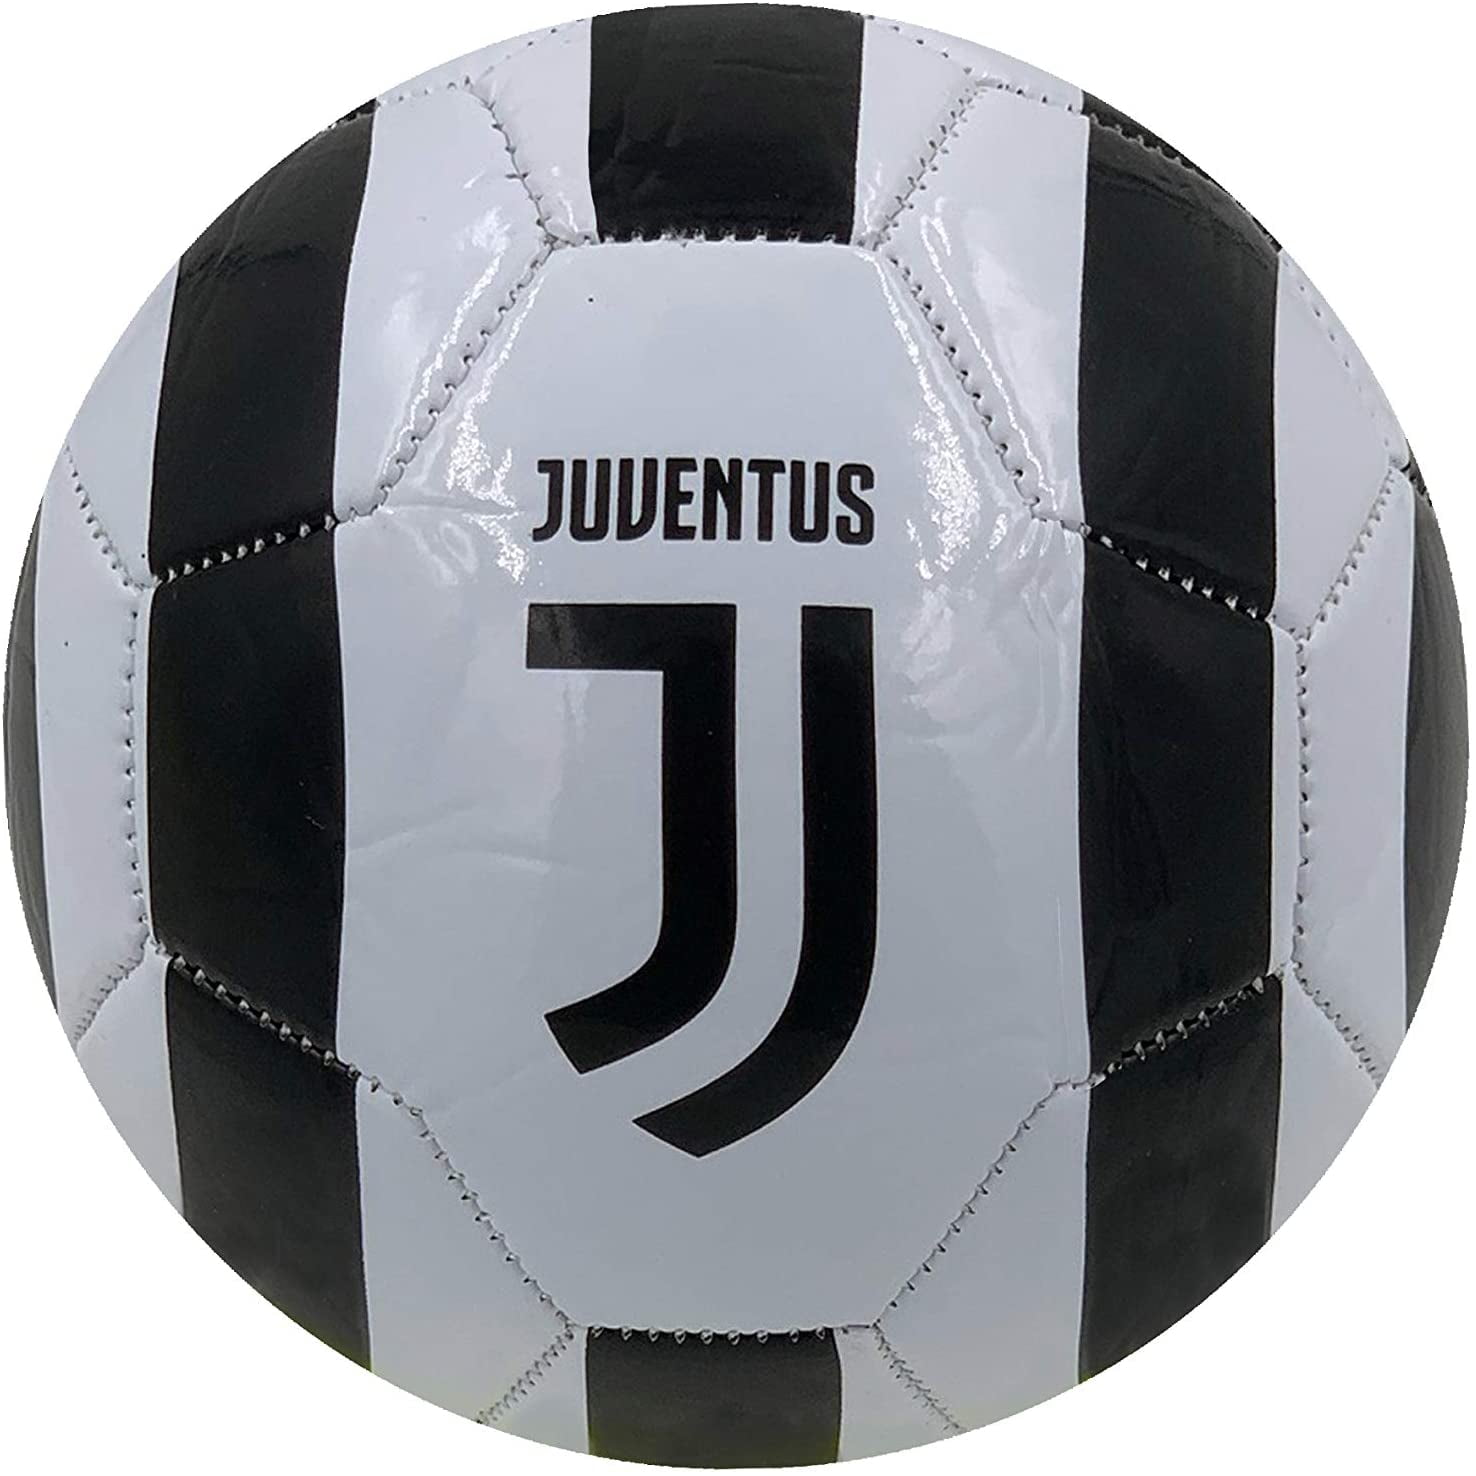 Icon Sports Juventus FC Scarf Reversible Black White Winter Soccer Officially Licensed 005 